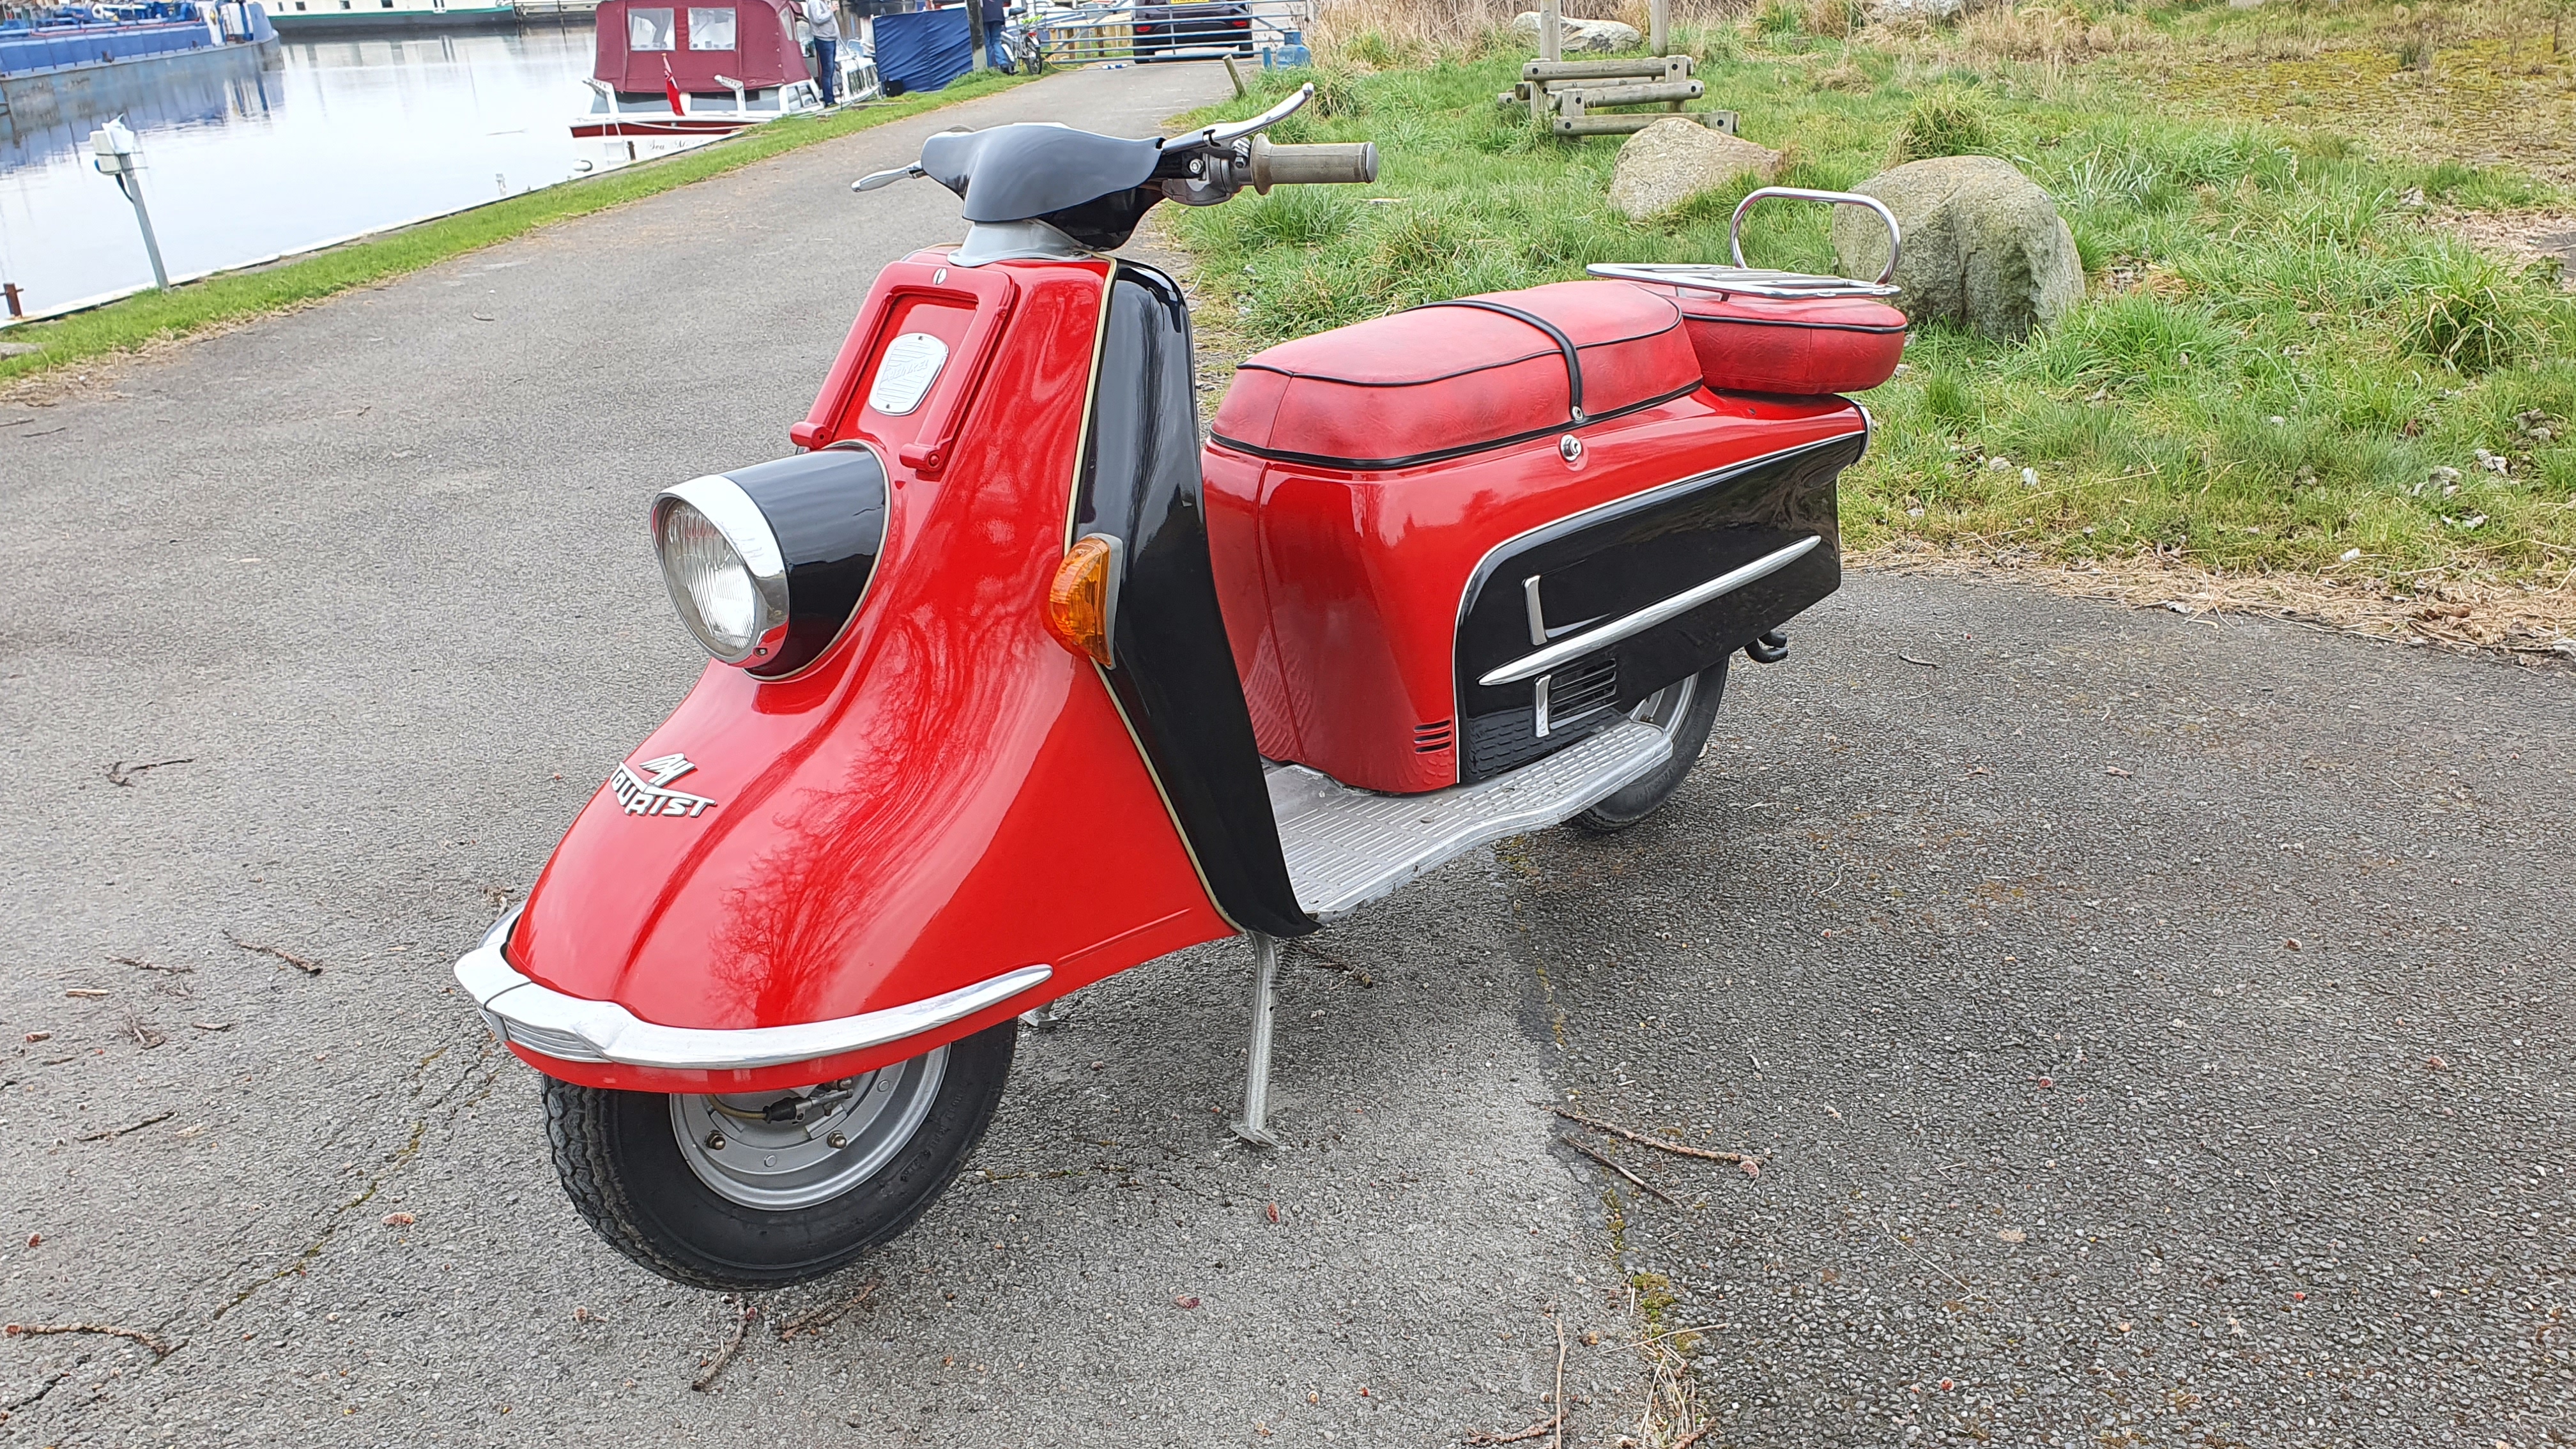 1962 Heinkel Tourist A-02, 174cc. Registration number 248 XVH (non transferrable). - Image 5 of 15